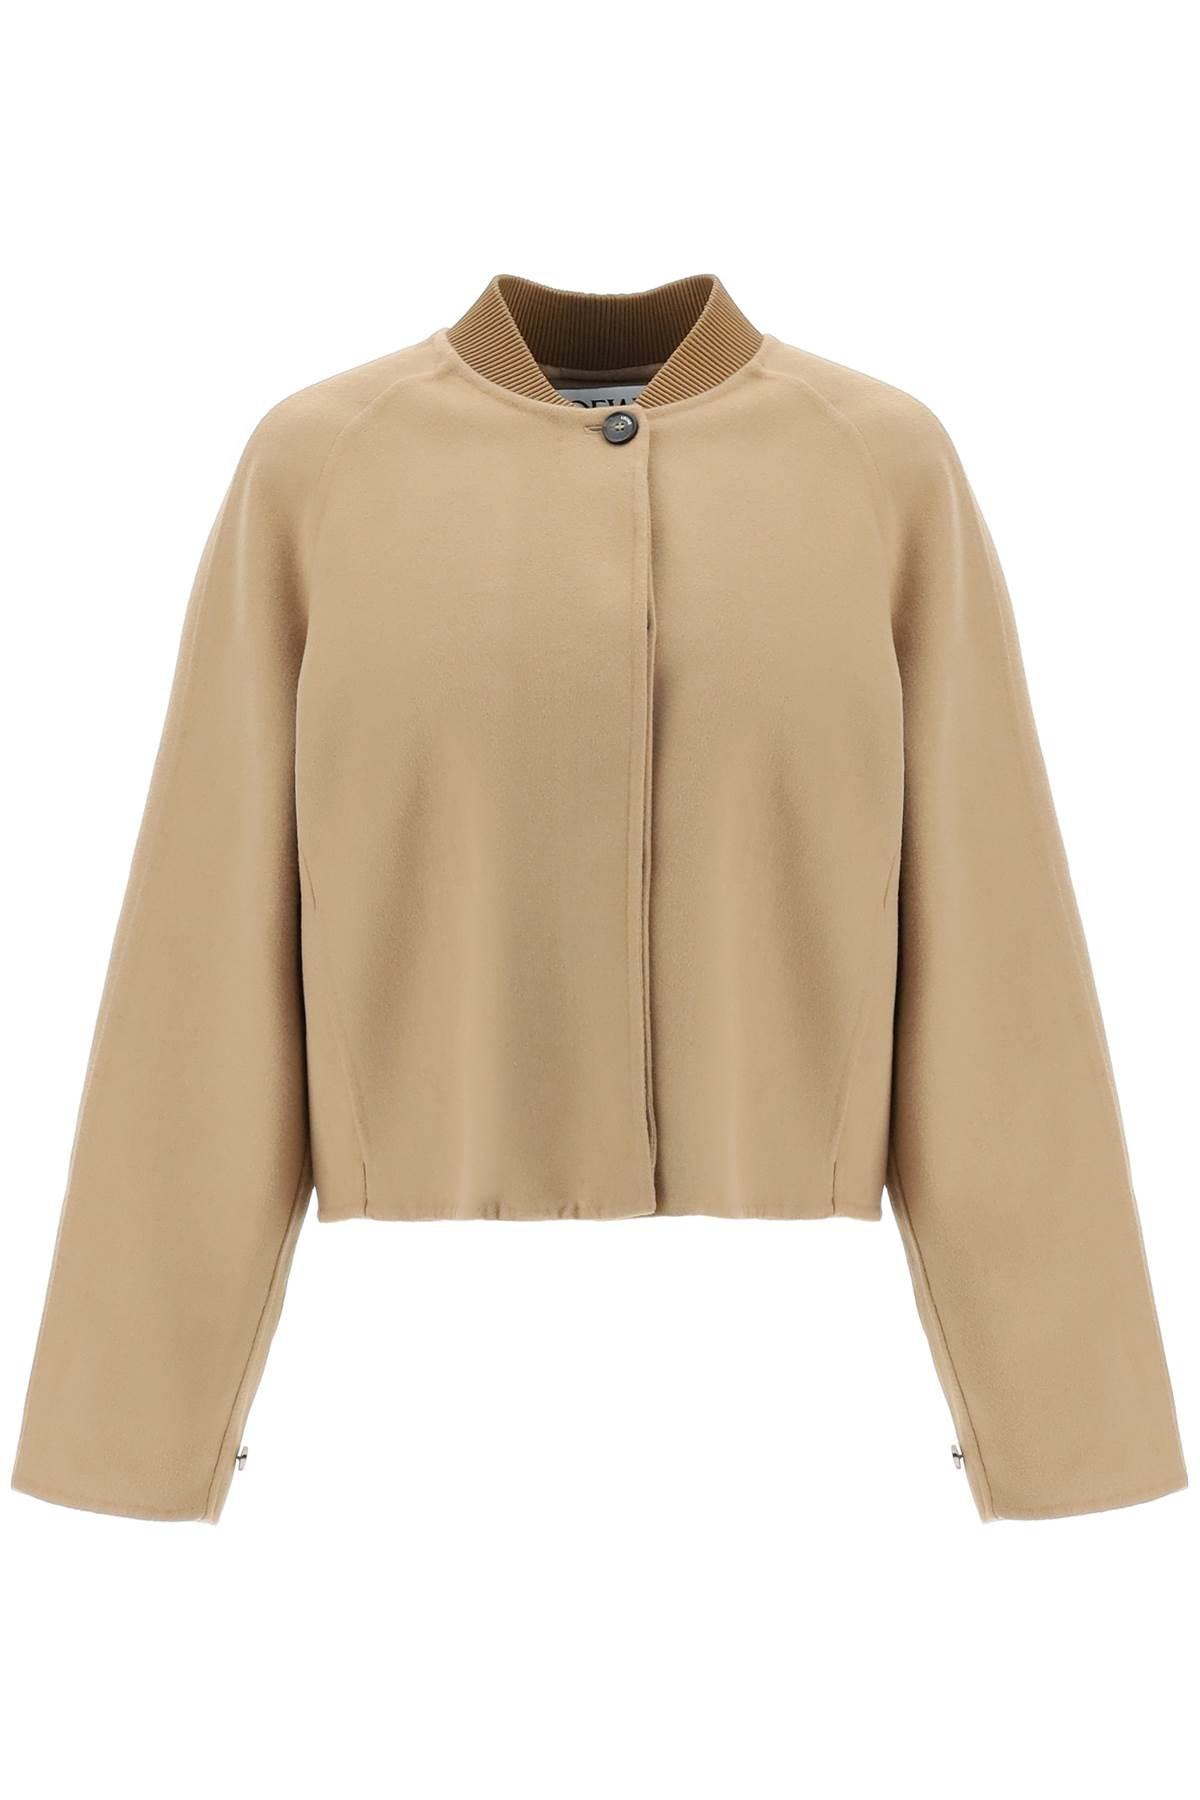 Loewe Wool And Cashmere Cape Jacket in Natural | Lyst